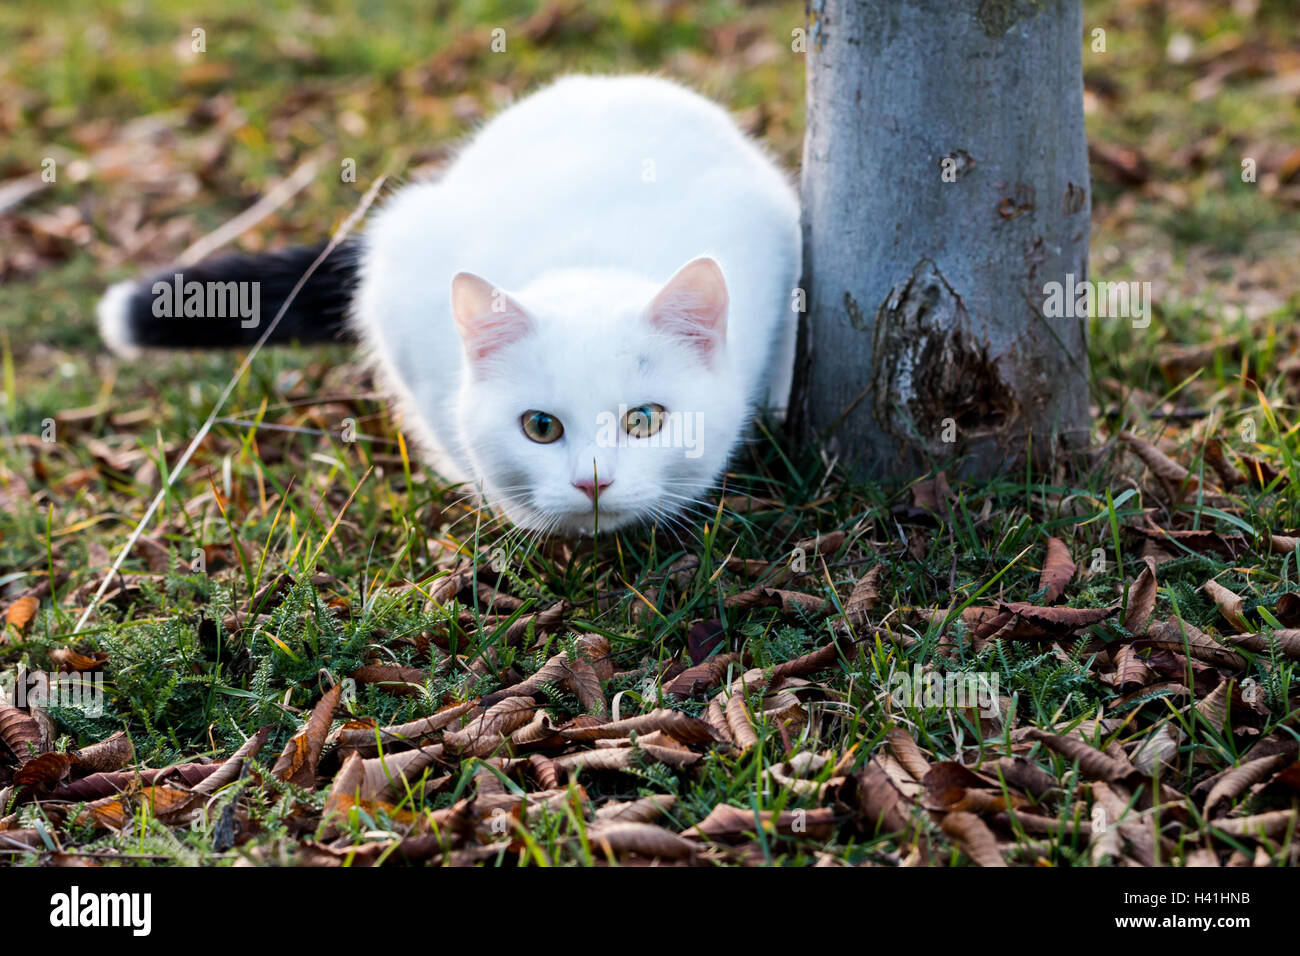 White  cat with black tail getting ready to jump while sitting on the grass Stock Photo